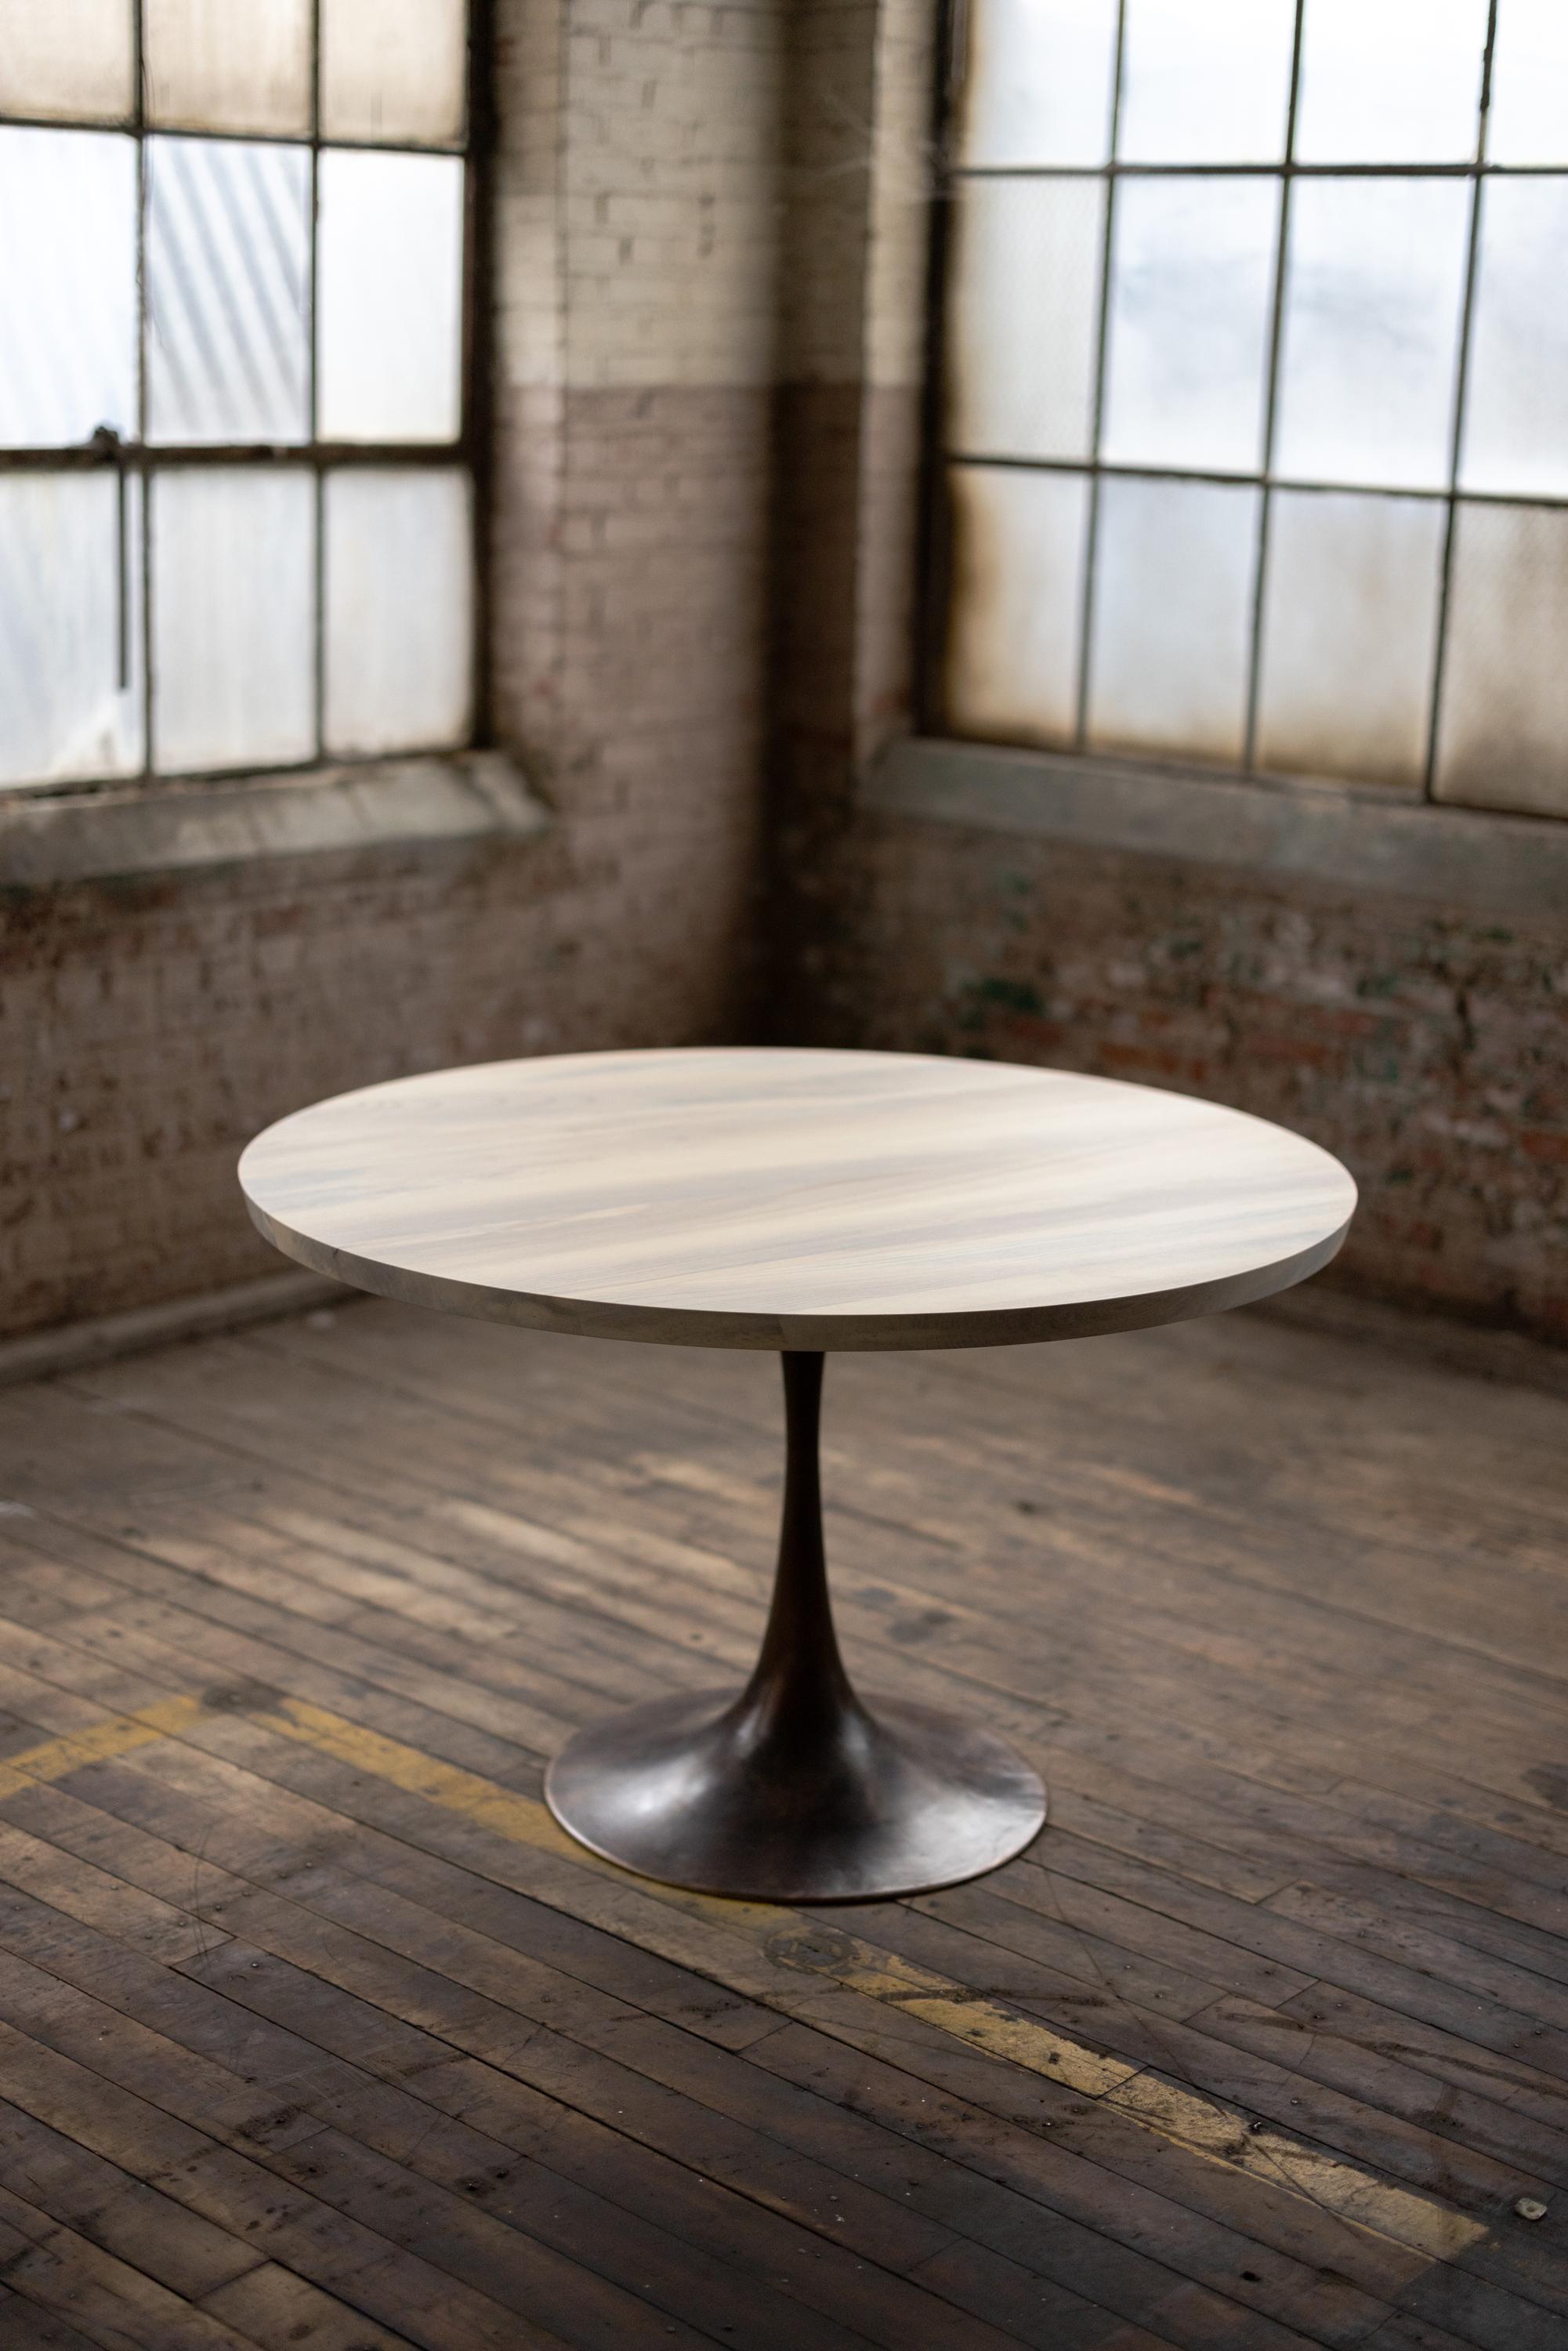 The Amicalola base captures the room set against a round or oval table top. This pedestal base is hand cast by the artisans in Birmingham, Alabama to look beautiful and function out of the way of diner's feet. Rich with Mid-Century Modern